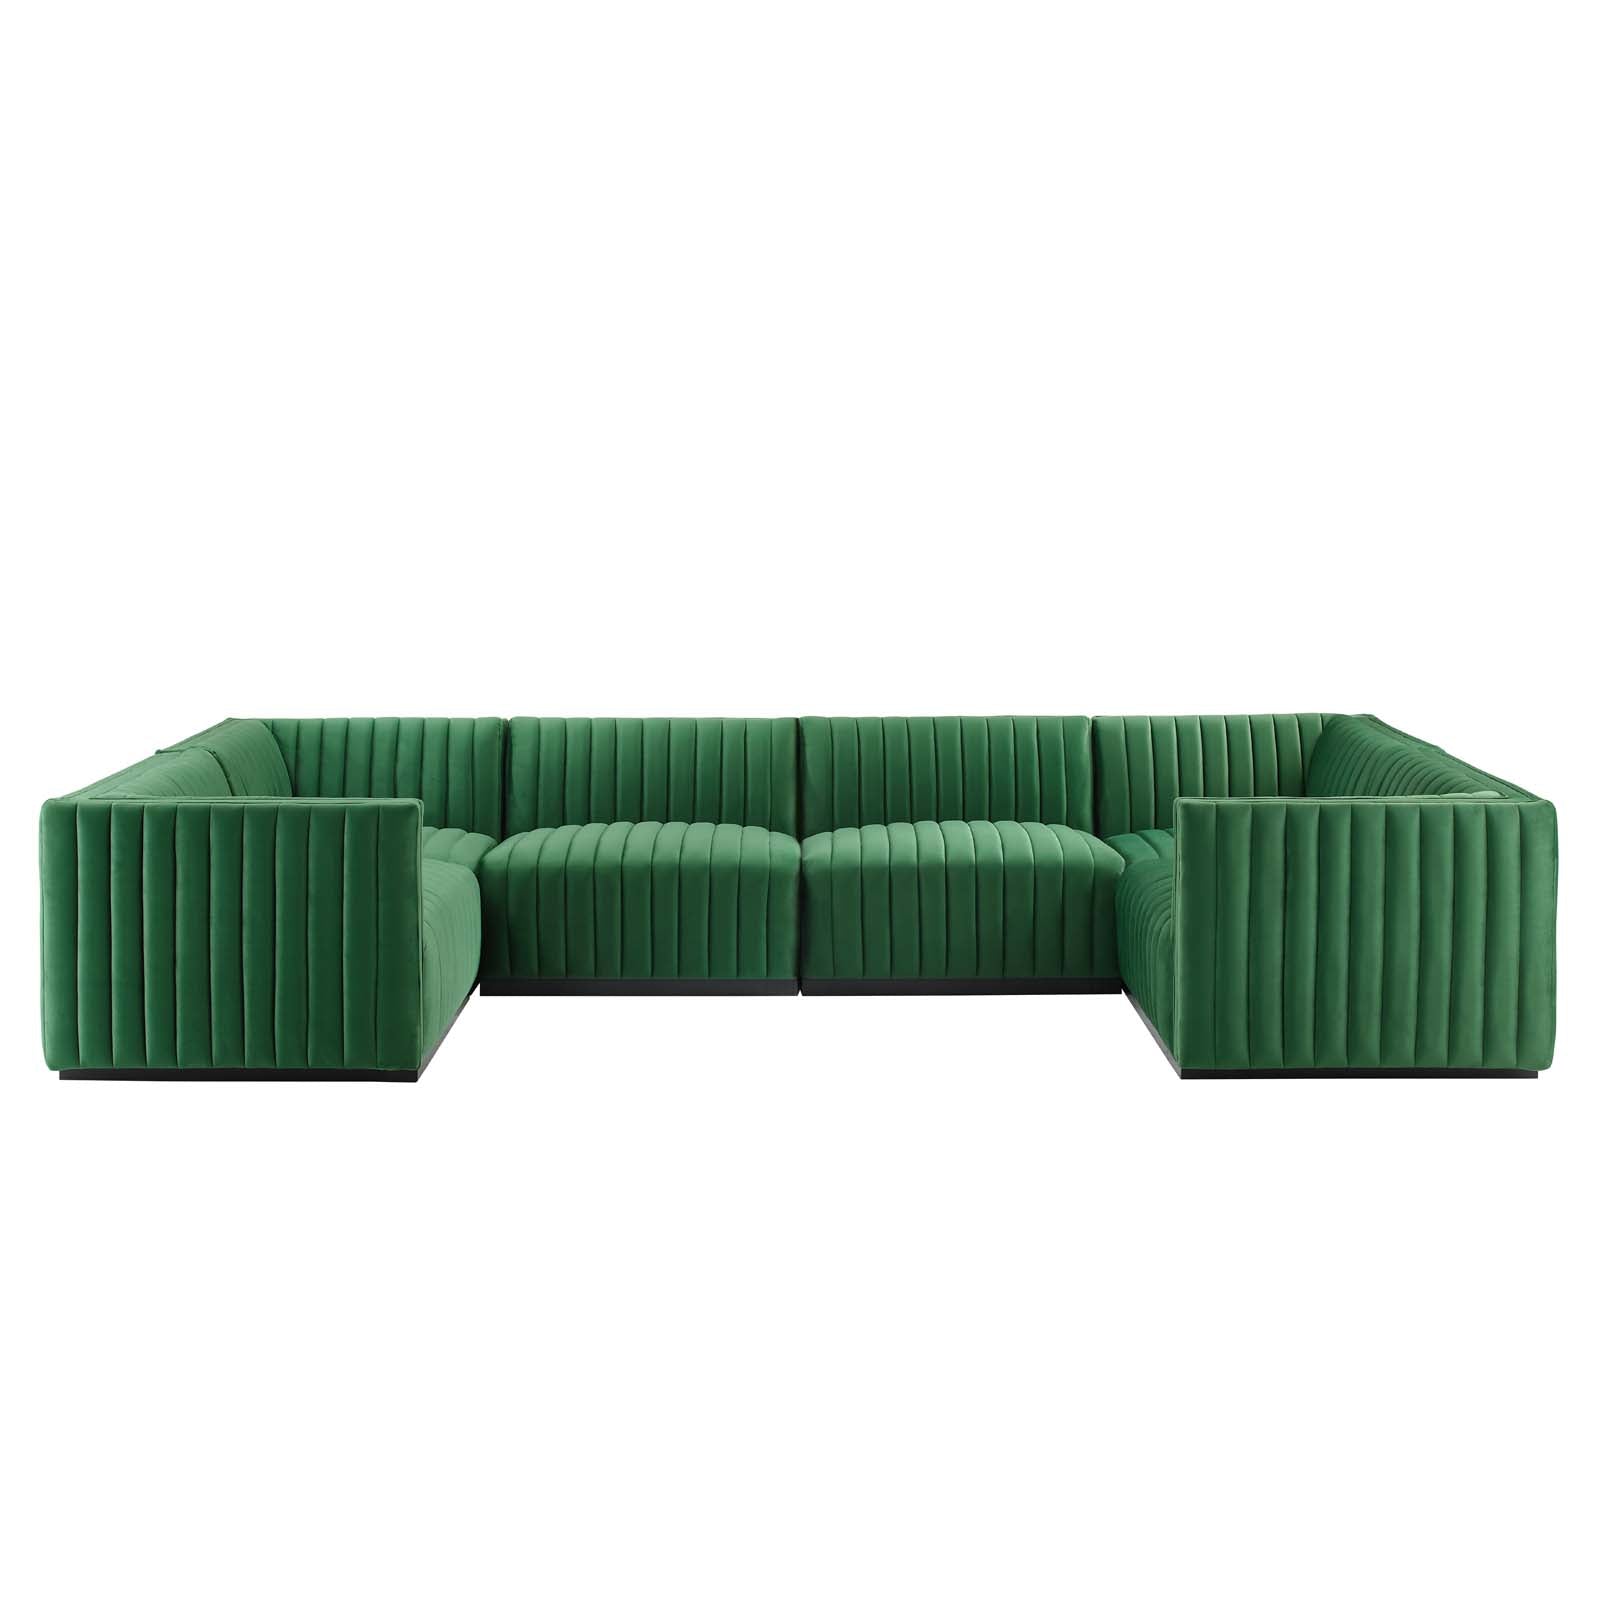 Modway Sectional Sofas - Conjure Channel Tufted Performance Velvet 6-Piece Sectional Black Emerald